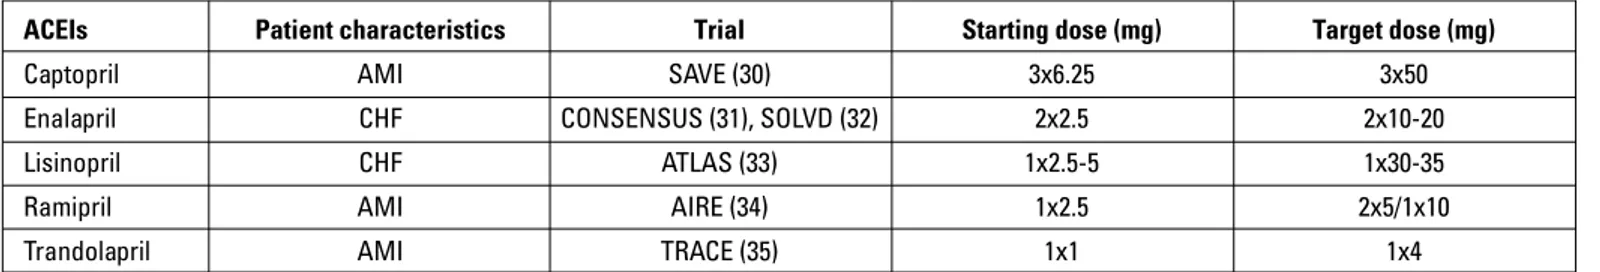 Table 6. ACEIs and their doses with proven efficacy in patients with HF in randomized, controlled trials